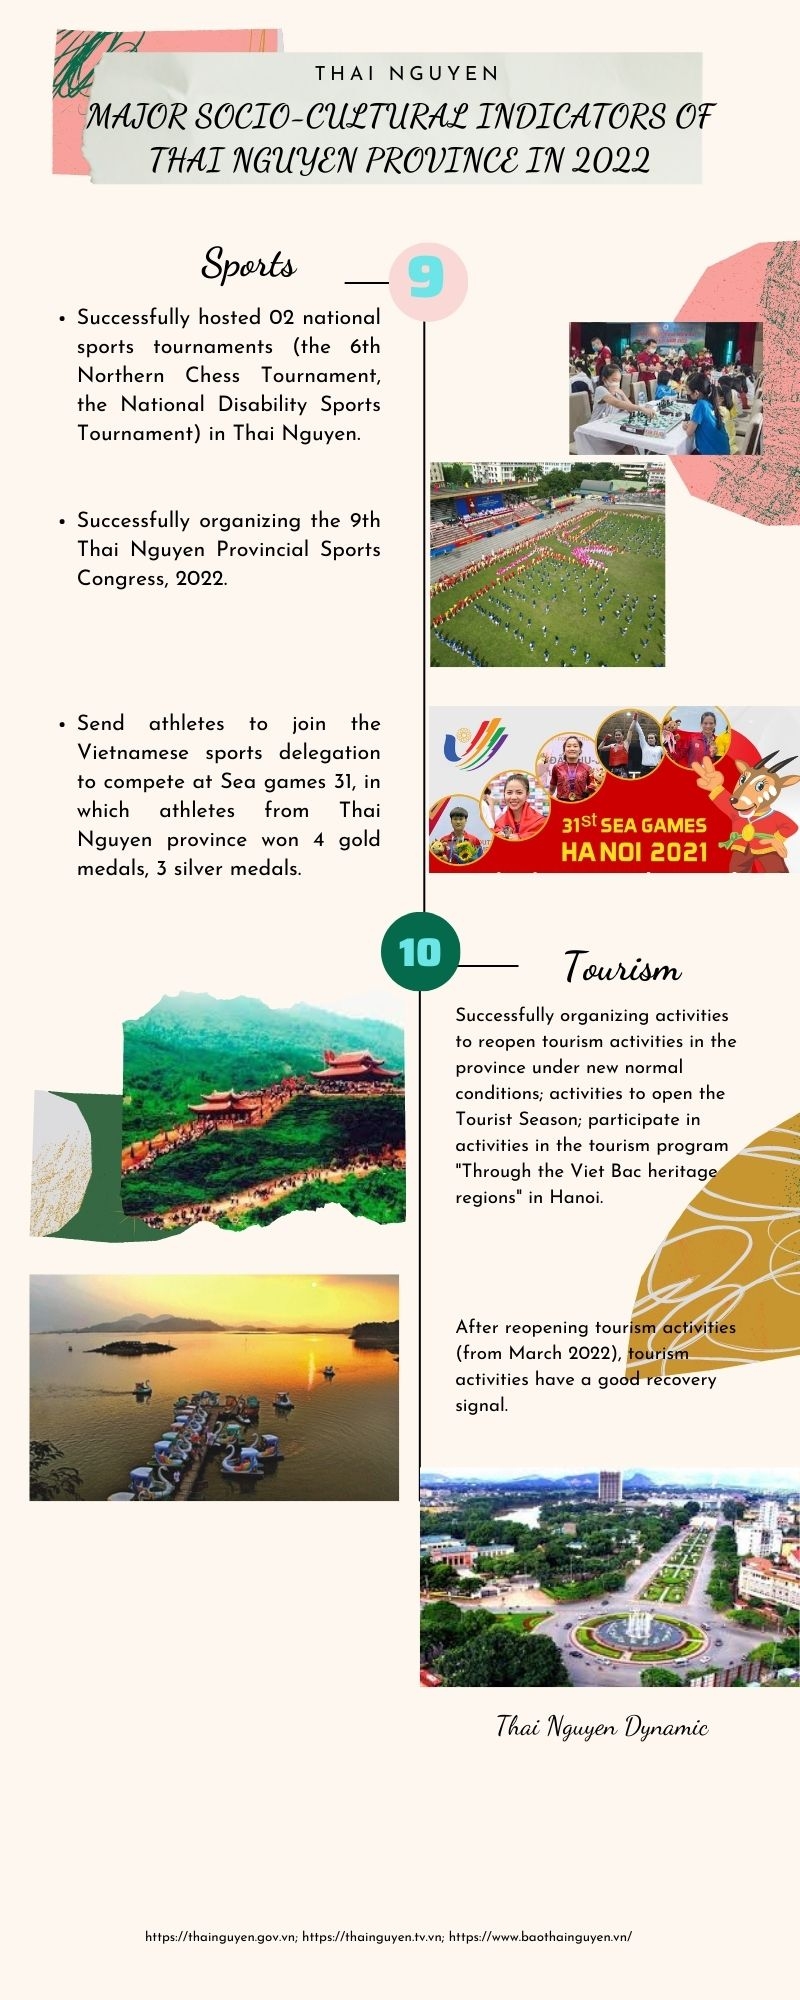 [Infographic] Major socio-cultural indicators of Thai Nguyen province in 2022